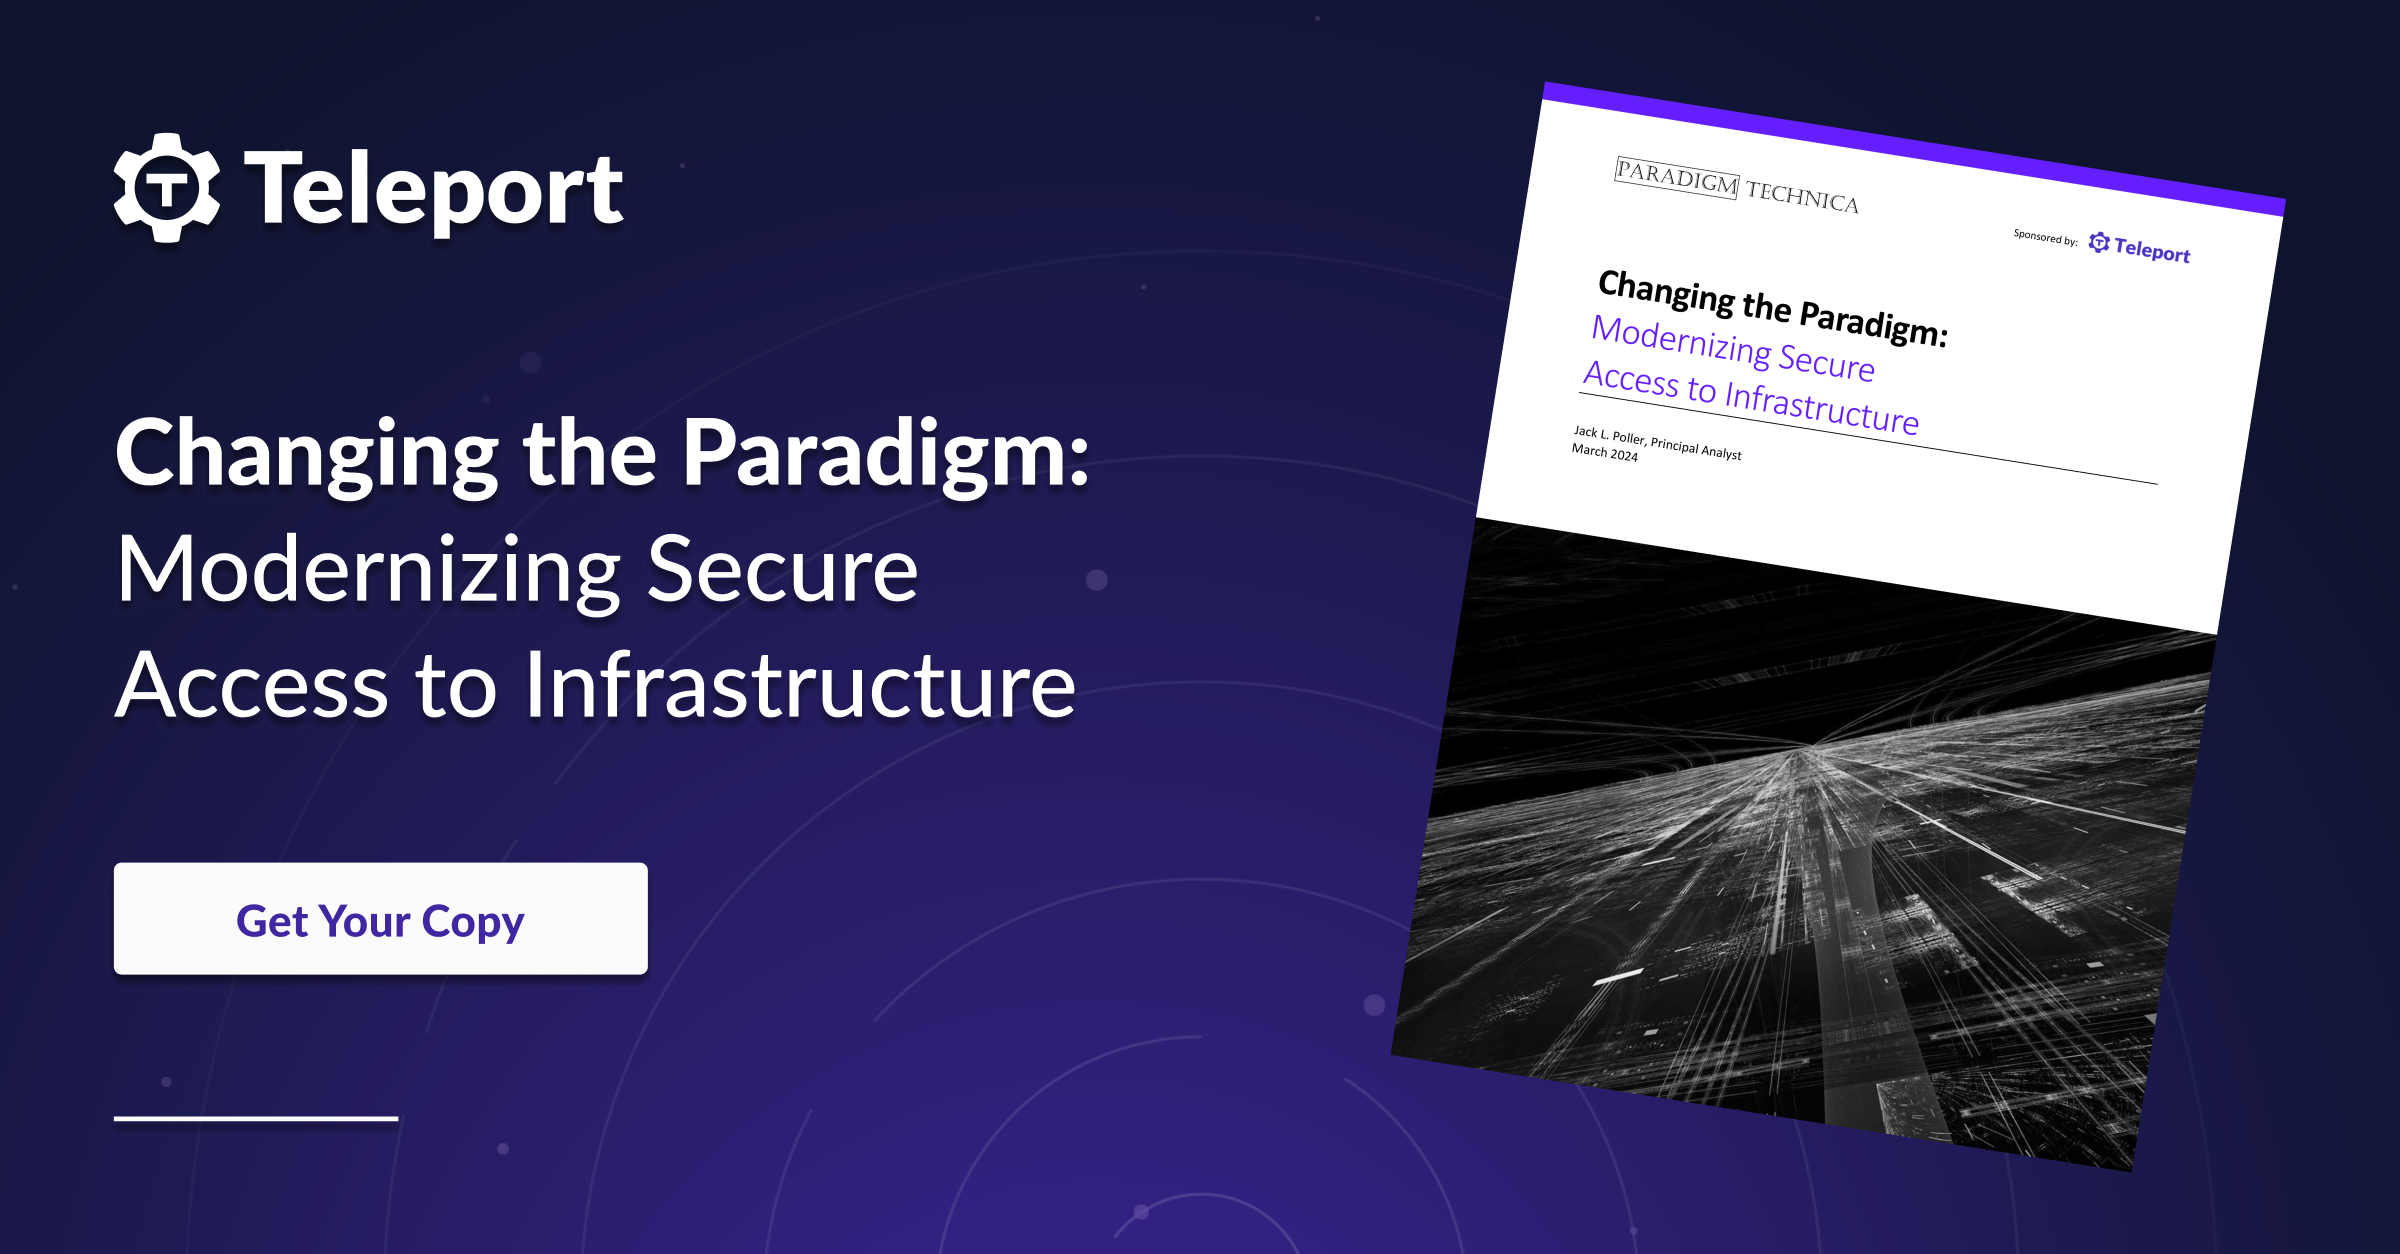 Modernizing Secure Access to Infrastructure